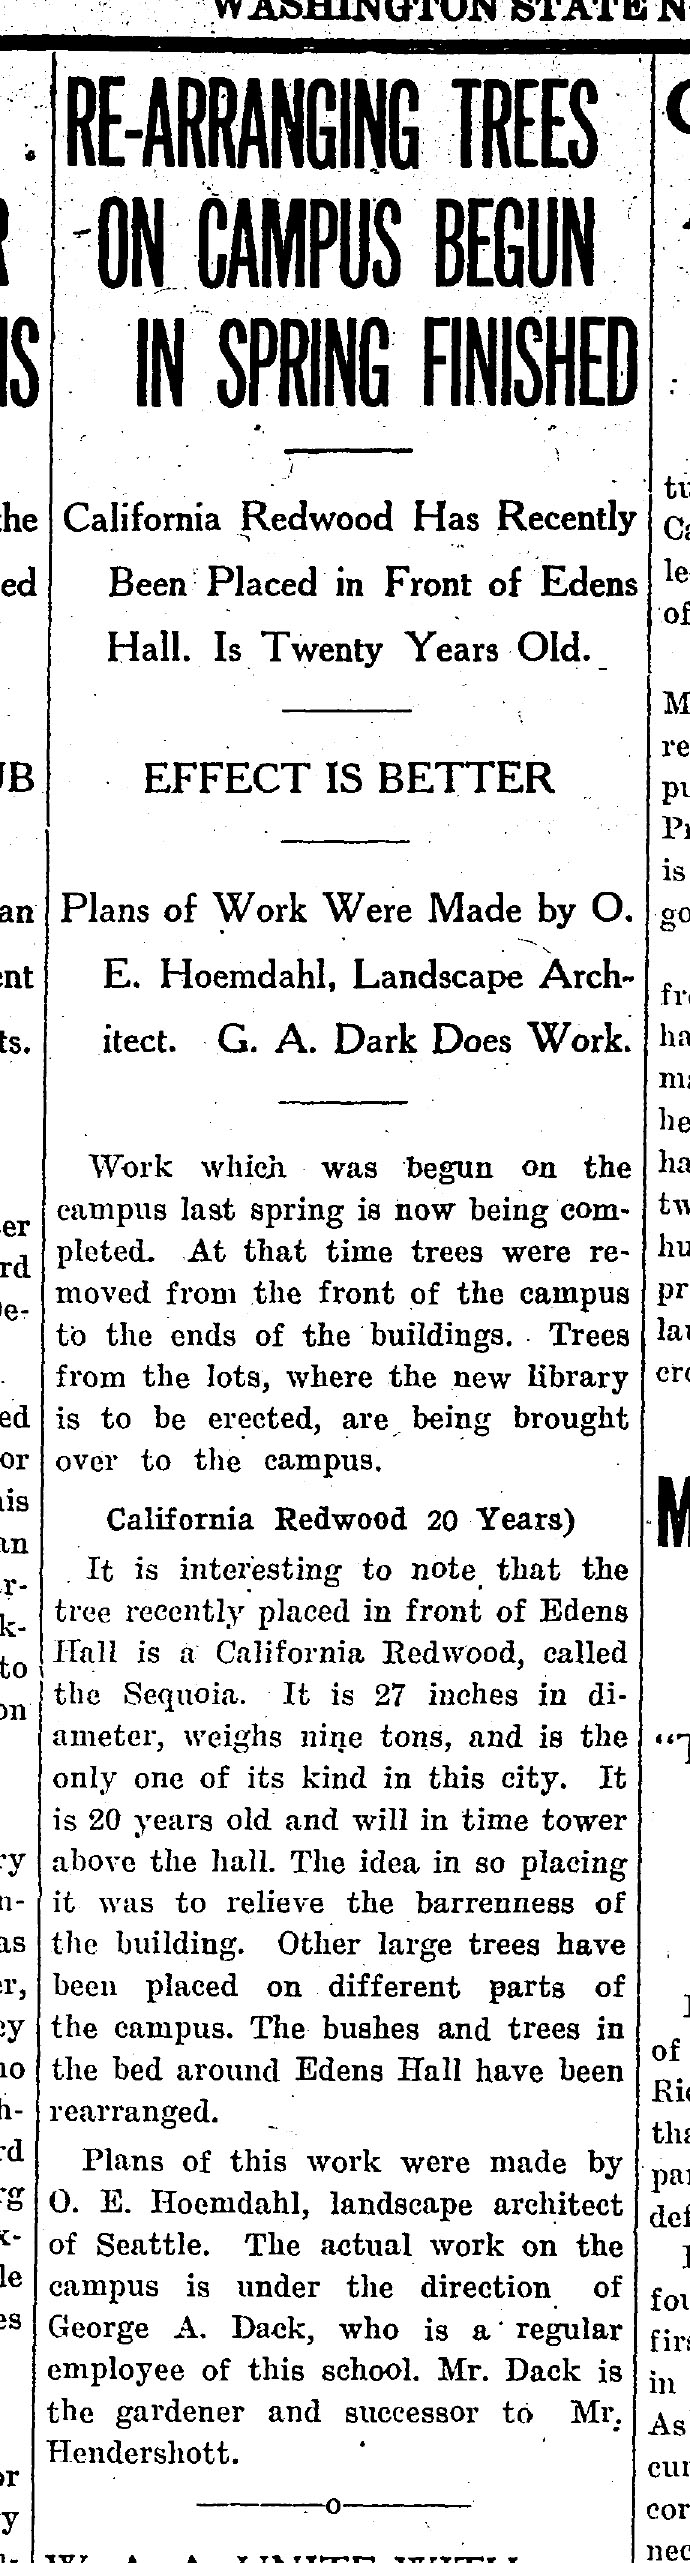 1926 newspaper clipping with headlines &quot;Rearranging of Trees Begun in Spring Finished.&quot; &quot;California Redwood Has Recently Been Placed in Front of Edens Hall. Is Twenty Years Old&quot; &quot;EFFECT IS BETTER&quot;&quot; 